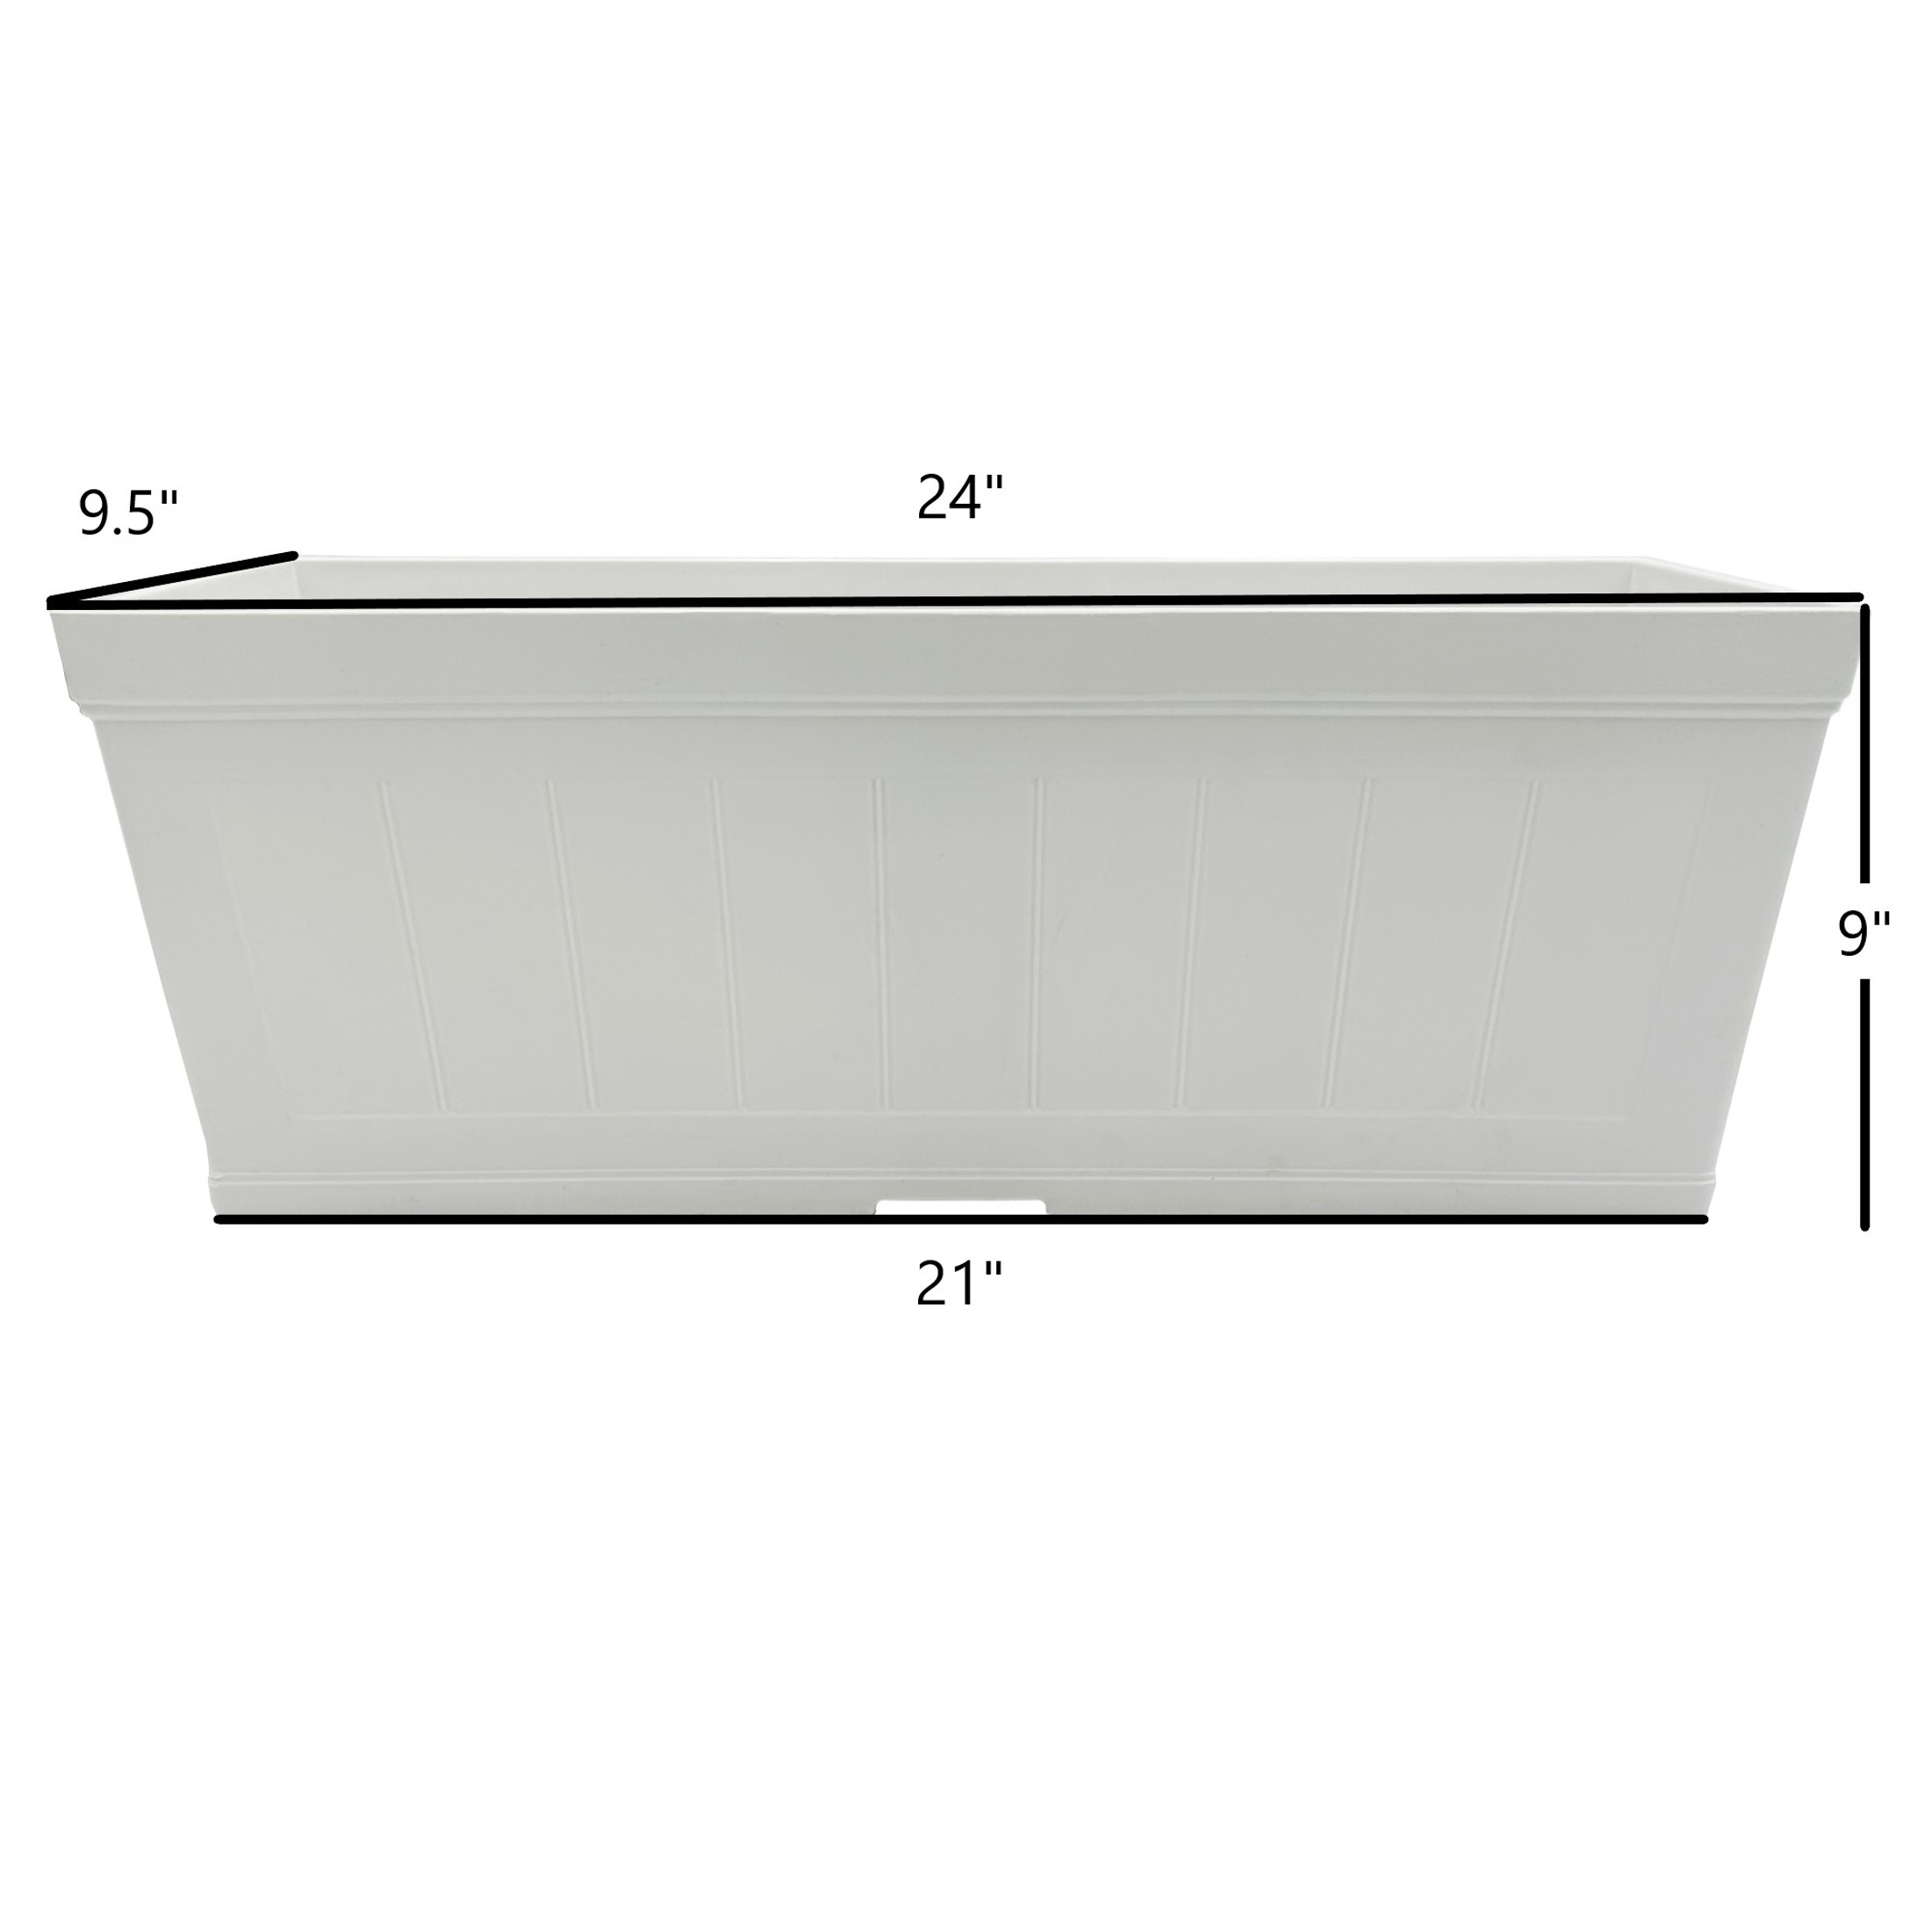 Classic Home and Garden Plastic Falmouth Window Box Planter with Drainage Holes, Starlight White Beadboard, 24in